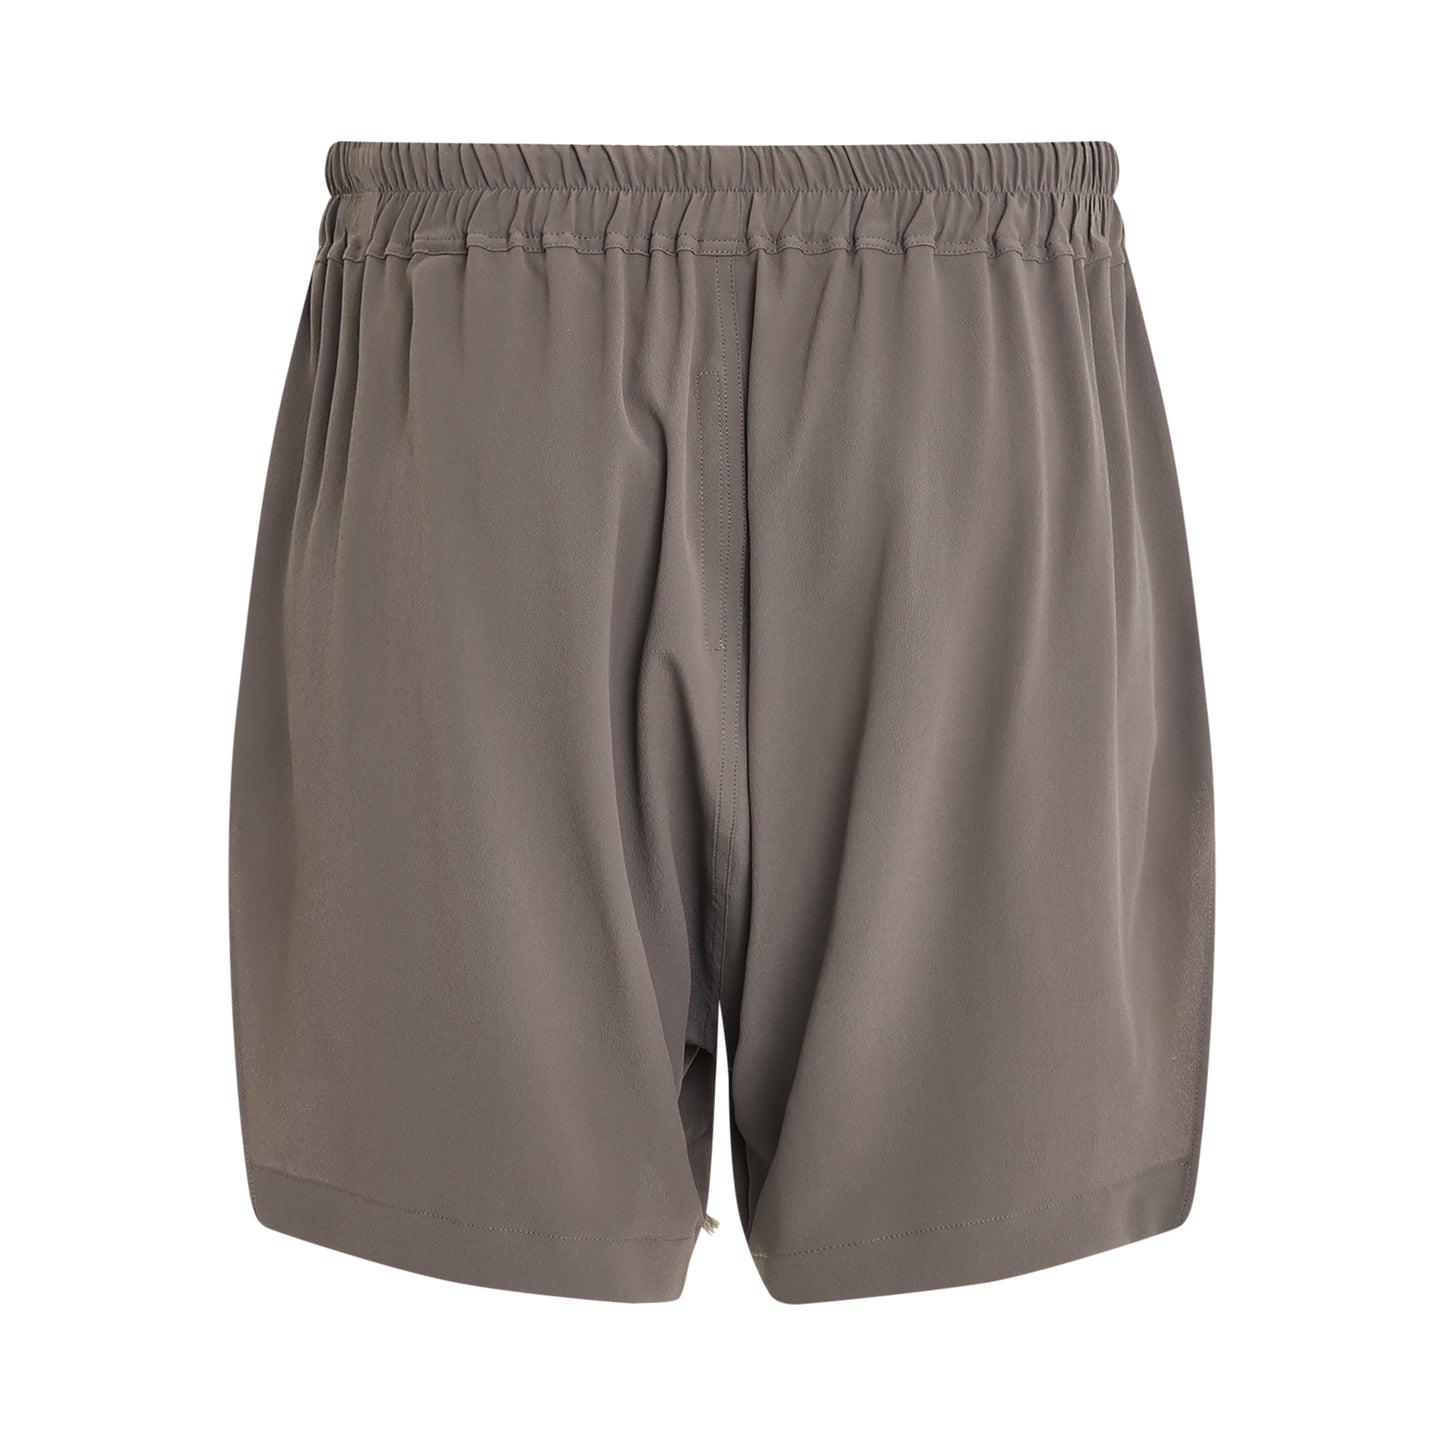 Cocoon Boxers Shorts in Dust